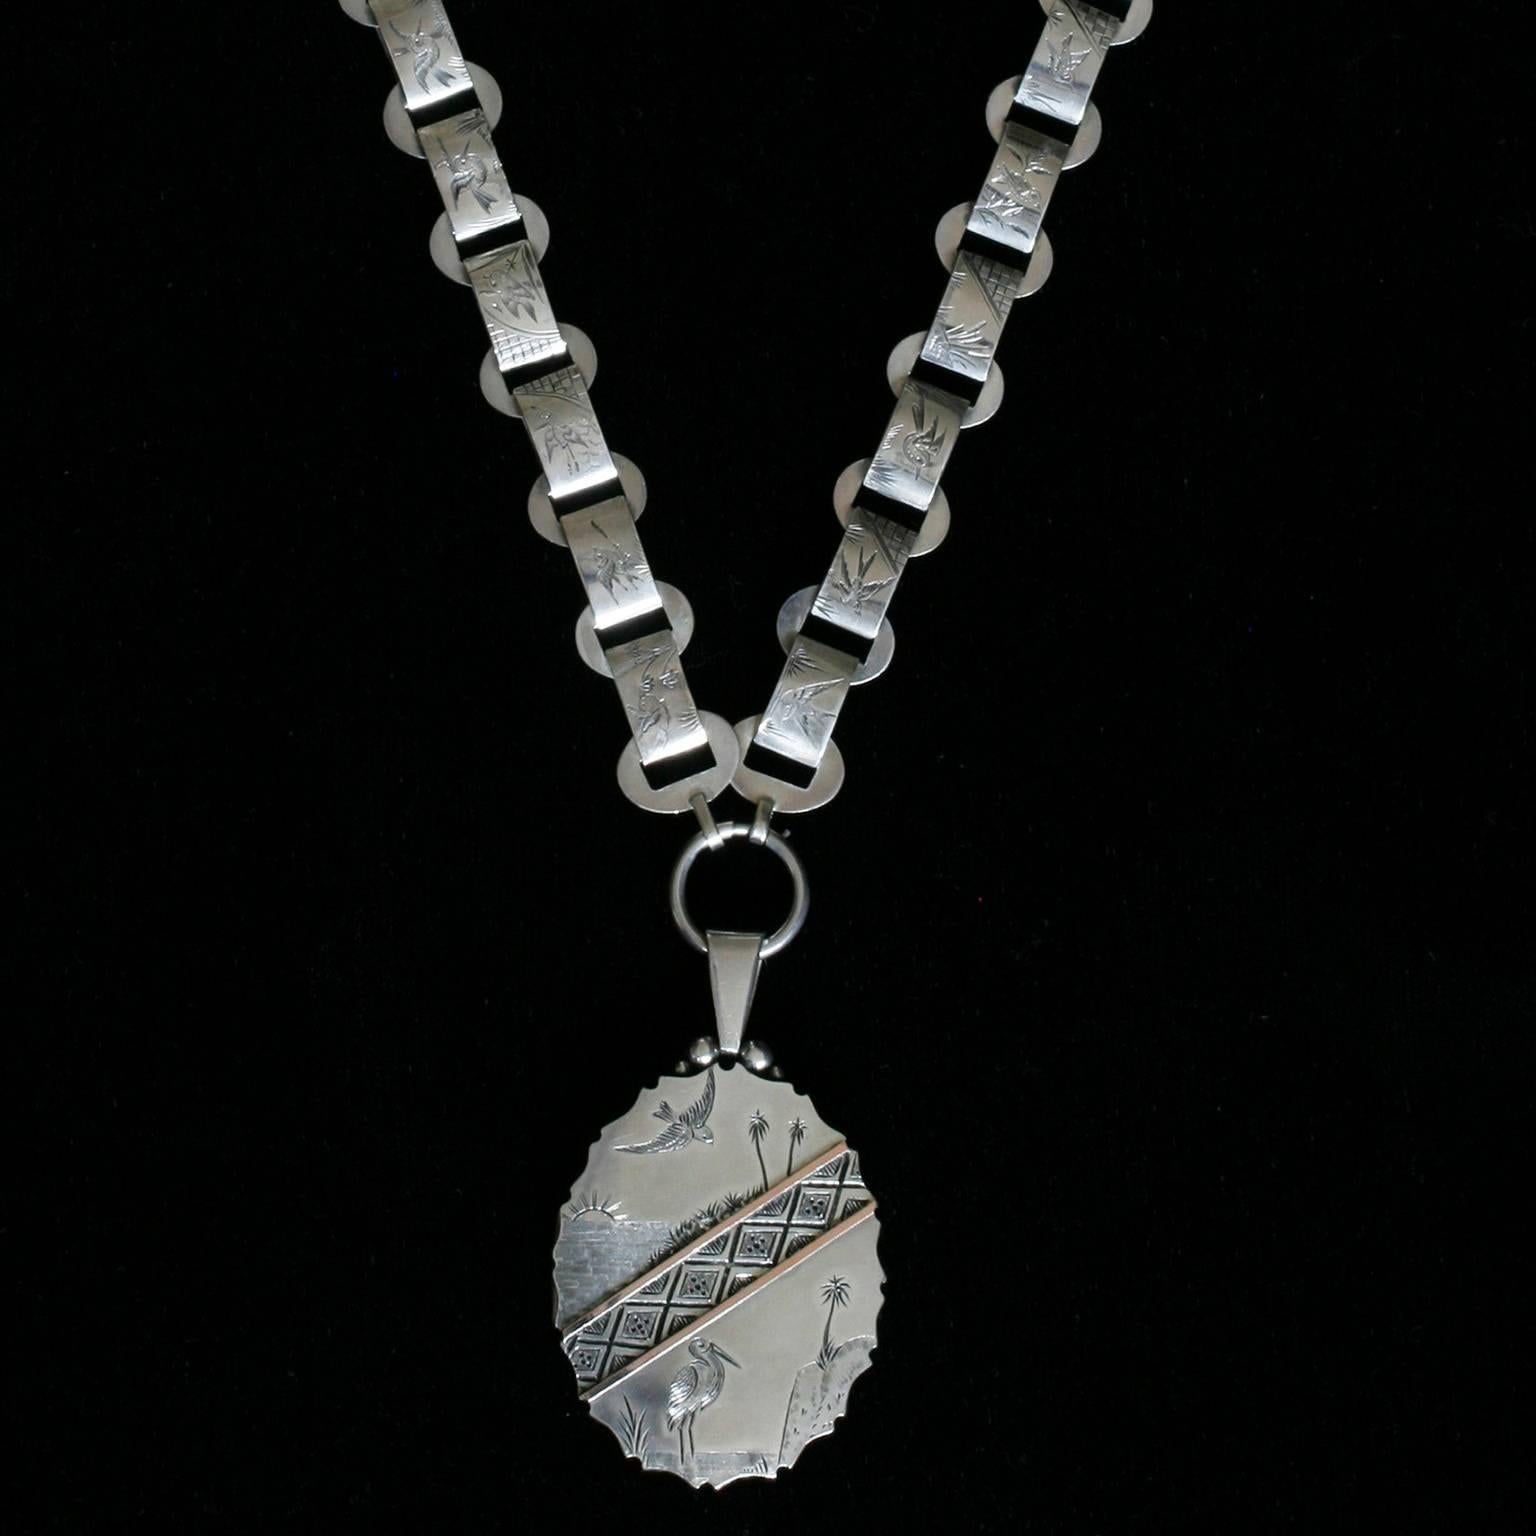 C.1890.  A gorgeous set of late Victorian aesthetic movement sterling silver collar with large silver and gold locket. It is an original matching set, which is fortunate, as with time, the matched set pieces often were separated or damaged, and it